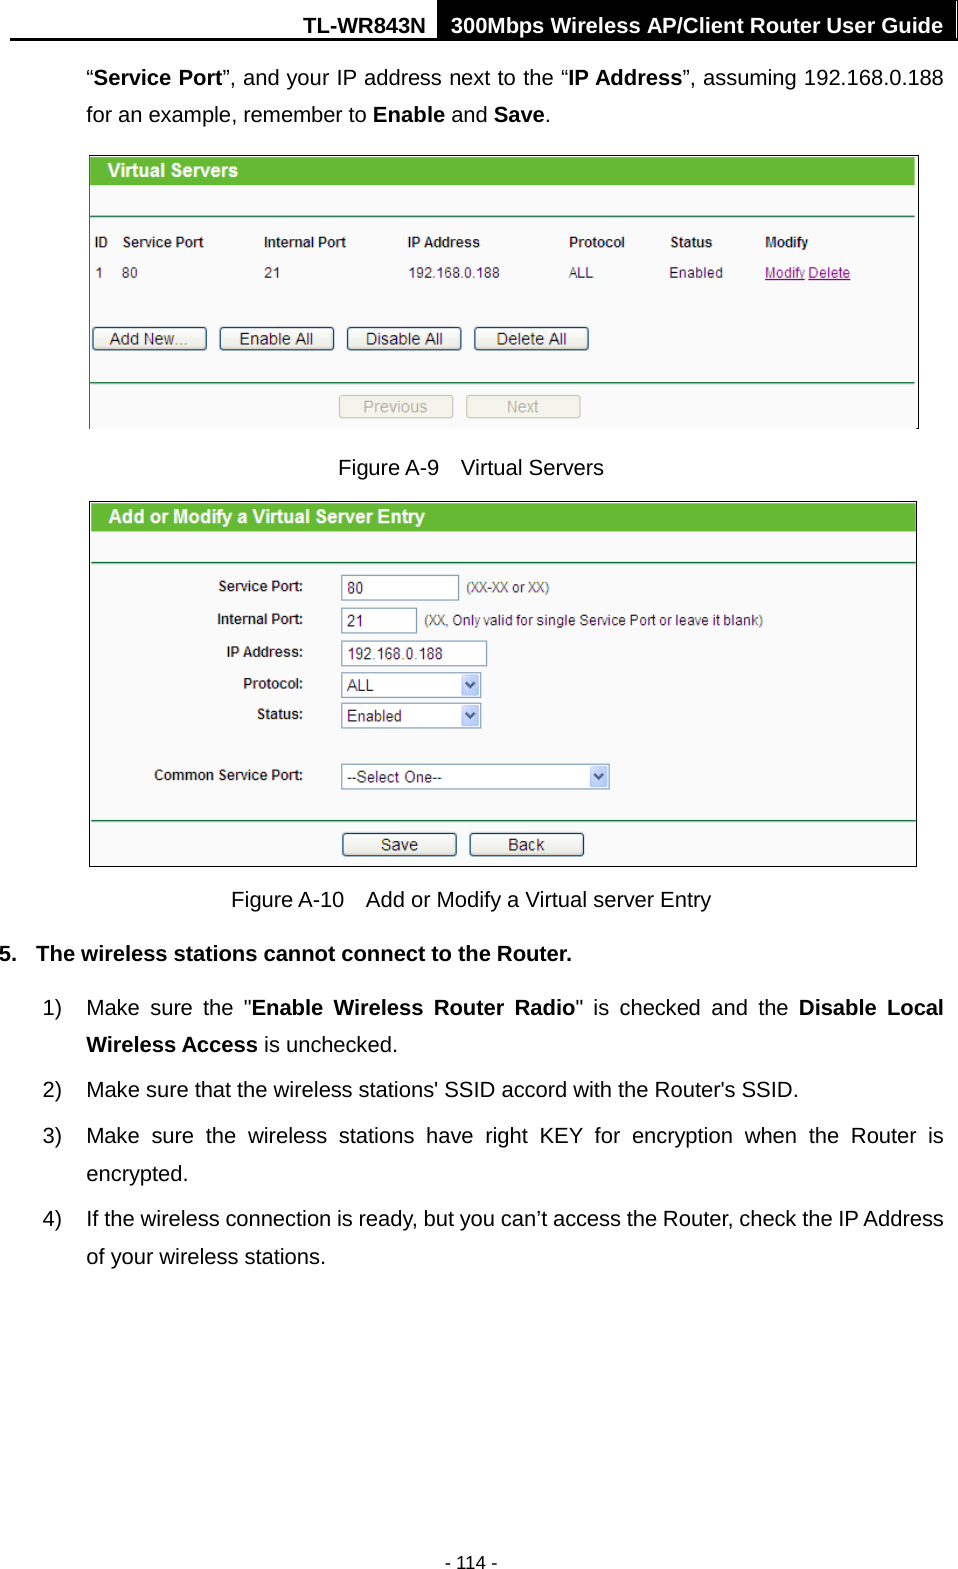 TL-WR843N 300Mbps Wireless AP/Client Router User Guide - 114 - “Service Port”, and your IP address next to the “IP Address”, assuming 192.168.0.188 for an example, remember to Enable and Save. Figure A-9  Virtual Servers Figure A-10  Add or Modify a Virtual server Entry 5. The wireless stations cannot connect to the Router.1) Make sure the &quot;Enable  Wireless Router Radio&quot; is checked and the Disable LocalWireless Access is unchecked.2) Make sure that the wireless stations&apos; SSID accord with the Router&apos;s SSID.3) Make sure the wireless stations have right KEY for encryption when the Router isencrypted.4) If the wireless connection is ready, but you can’t access the Router, check the IP Addressof your wireless stations.